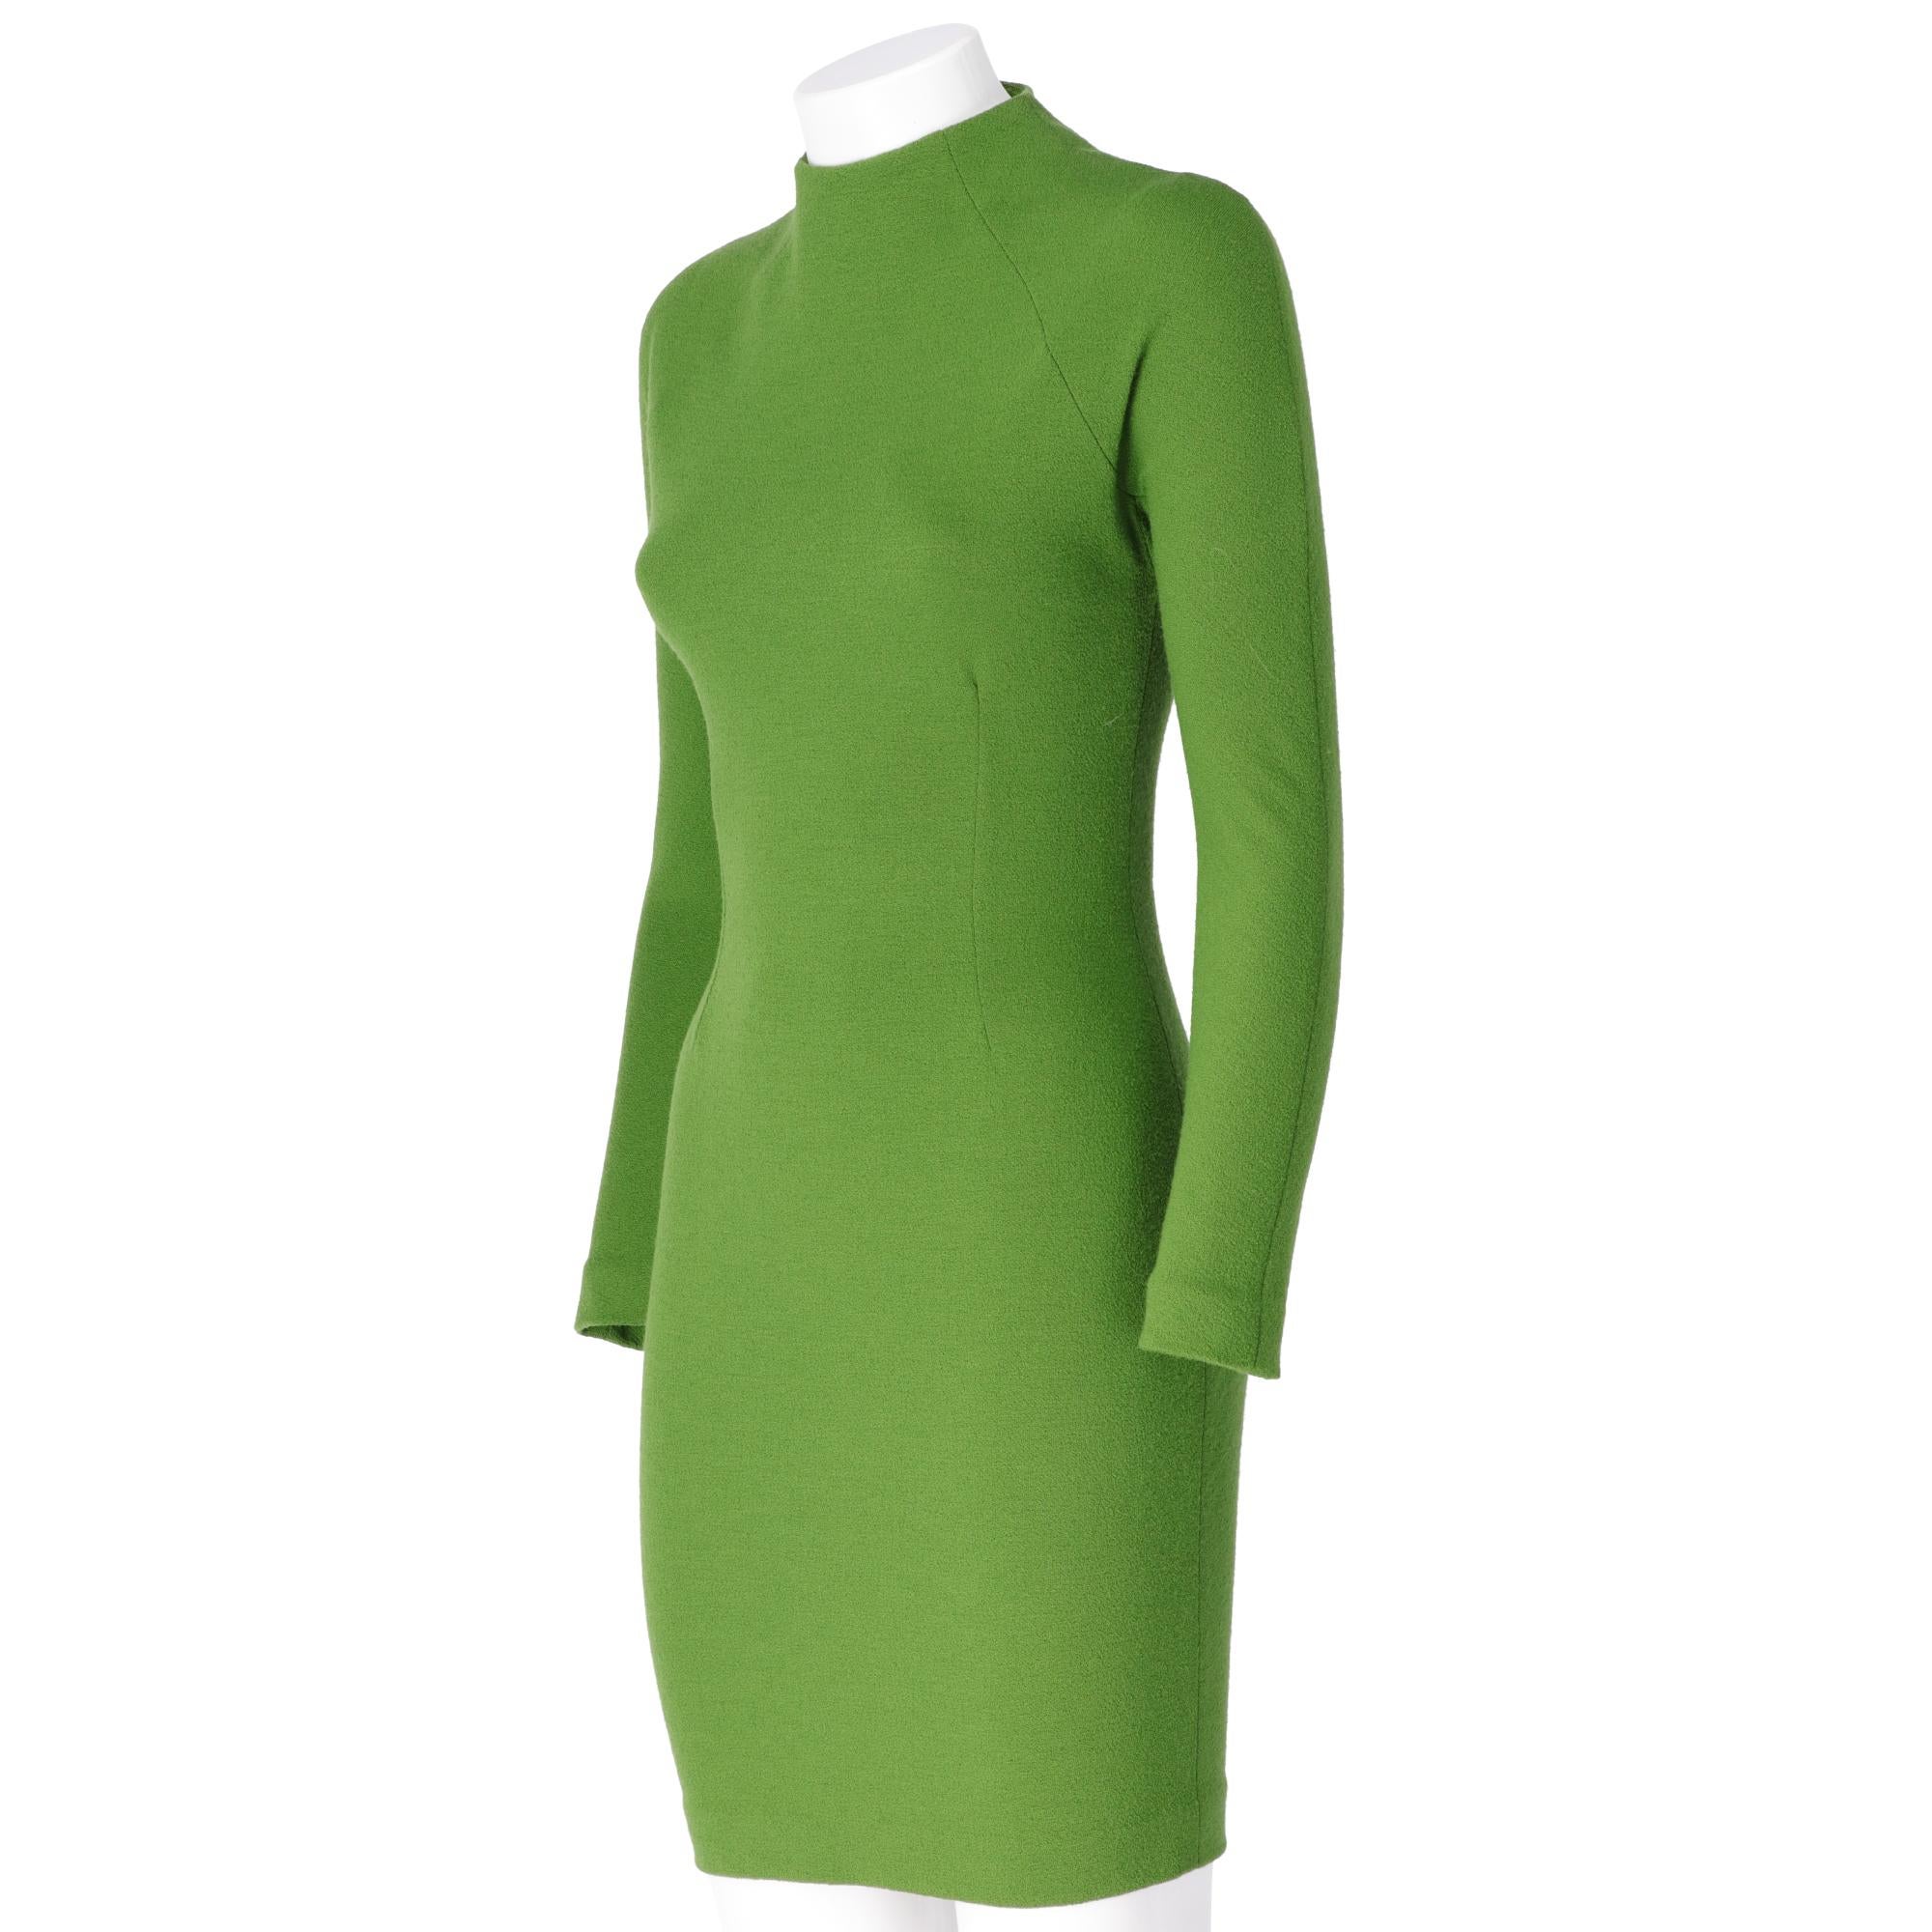 Fitted flared midi dress by Sybilla in pea green wool, round neck with zip on the back, long sleeves, decorative carving on the back.
Years: 90s

Made in Italy 

Size: 40 IT

Linear measures

Height: 88 cm
Waist: 34 cm
Shoulders: 42 cm 